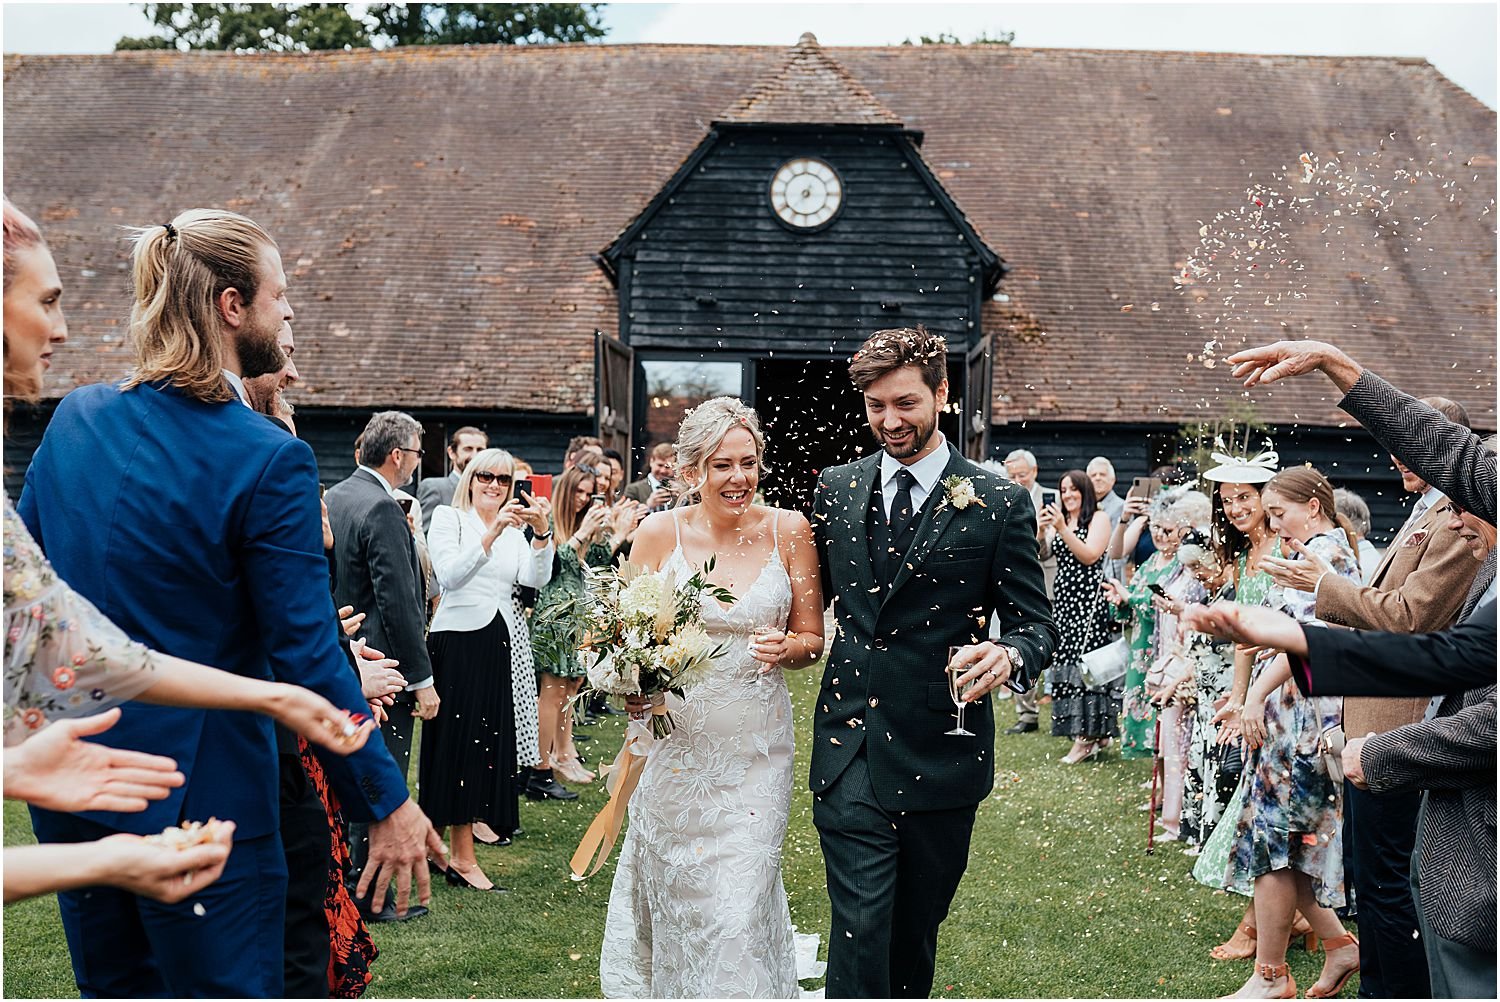 Guests throwing confetti at couple outside barn